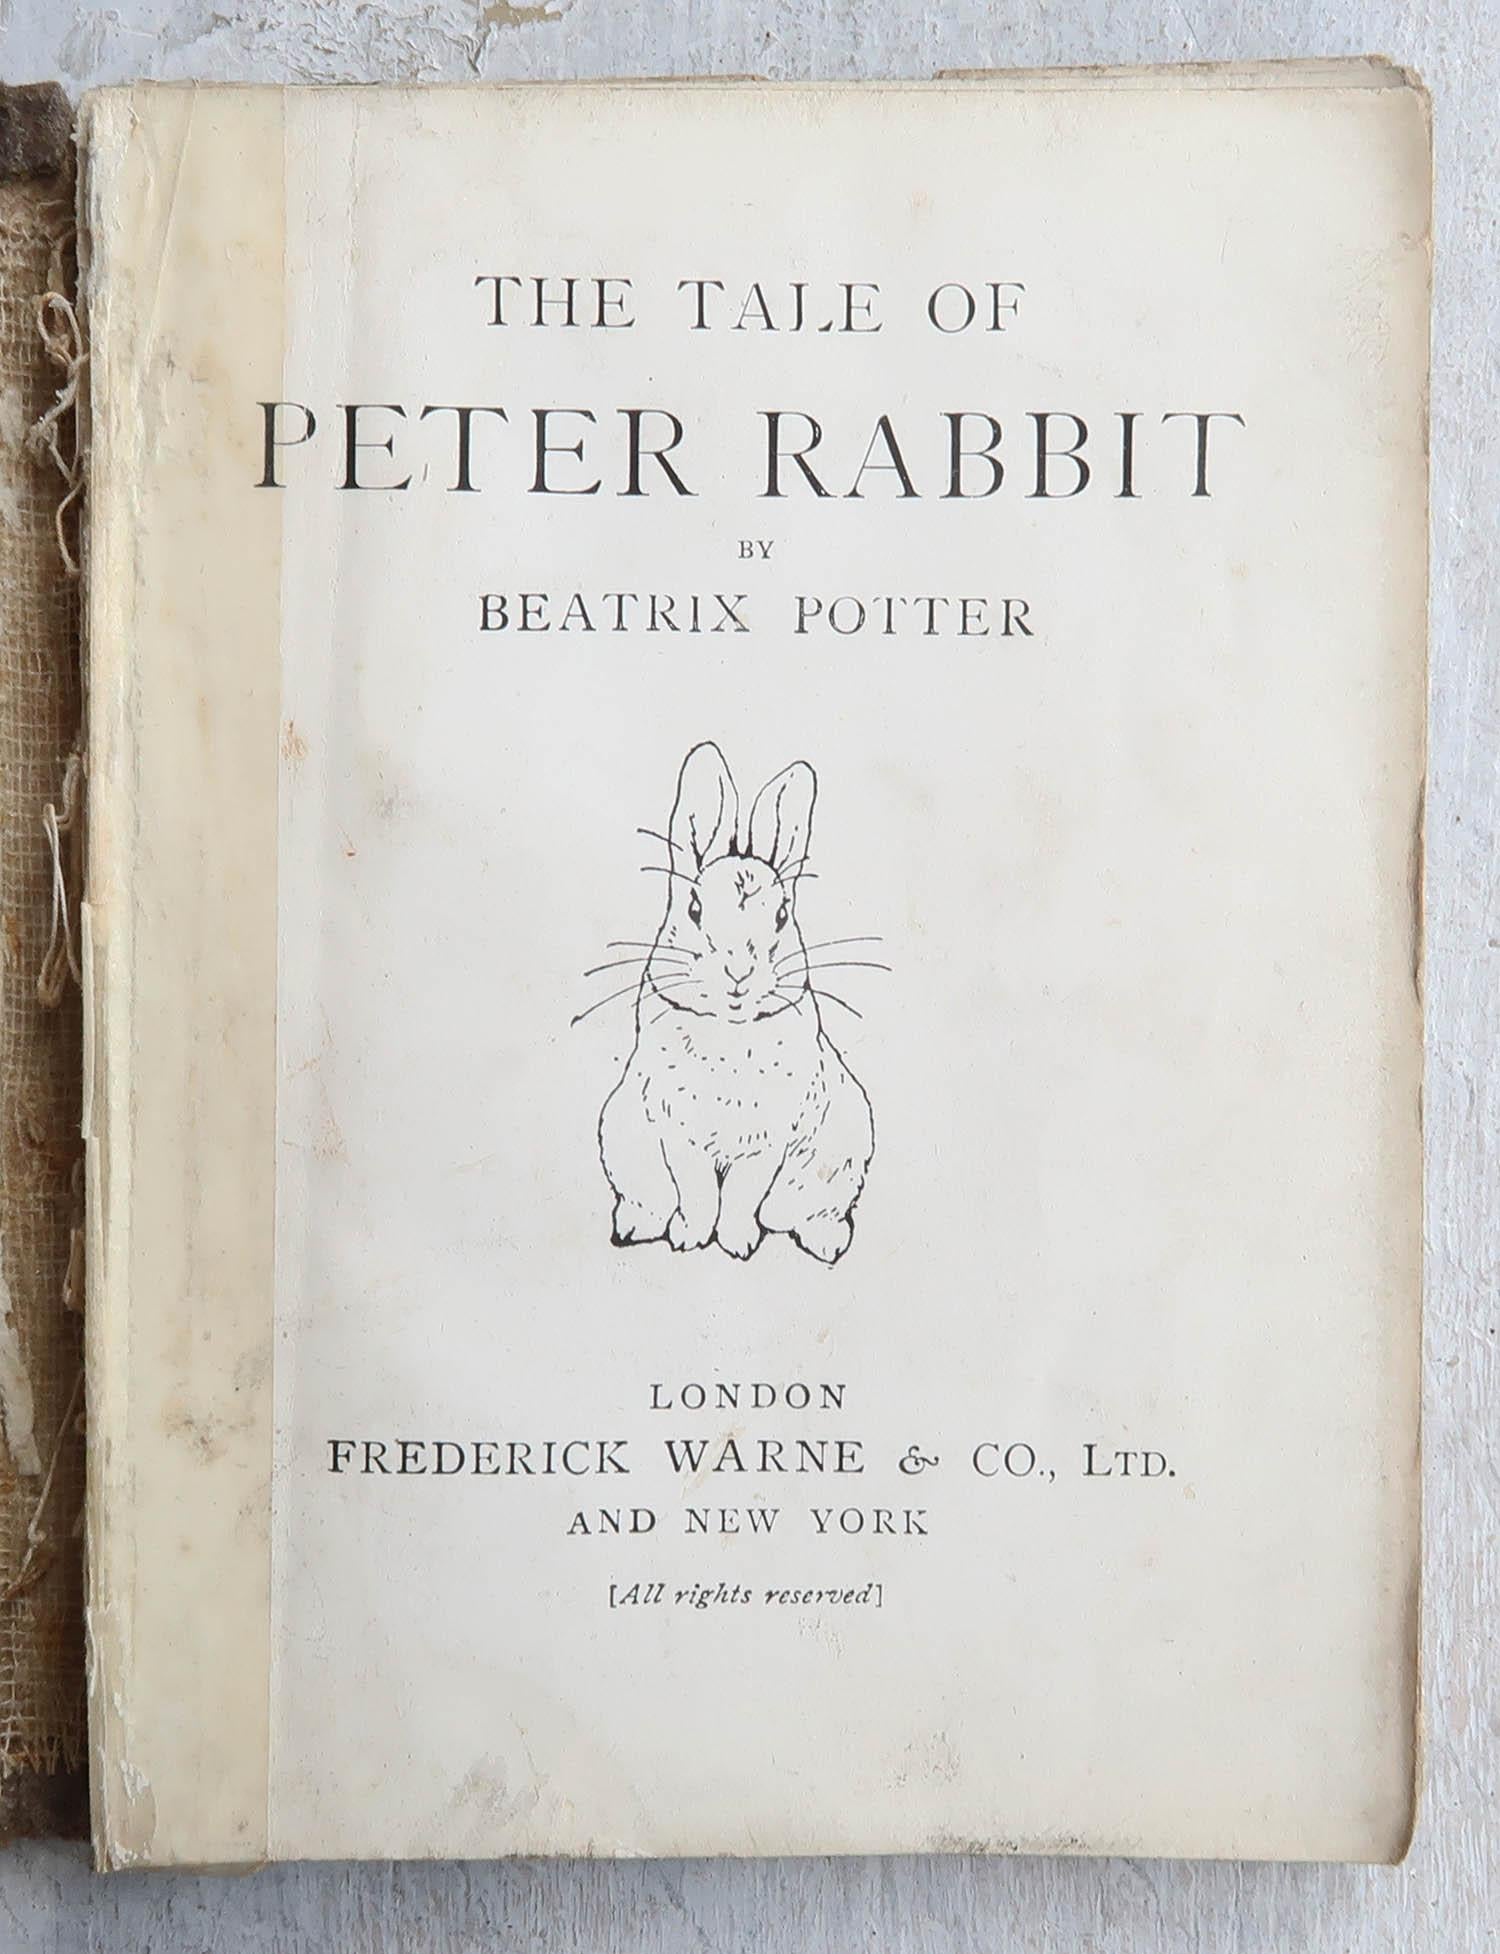 peter rabbit images to print